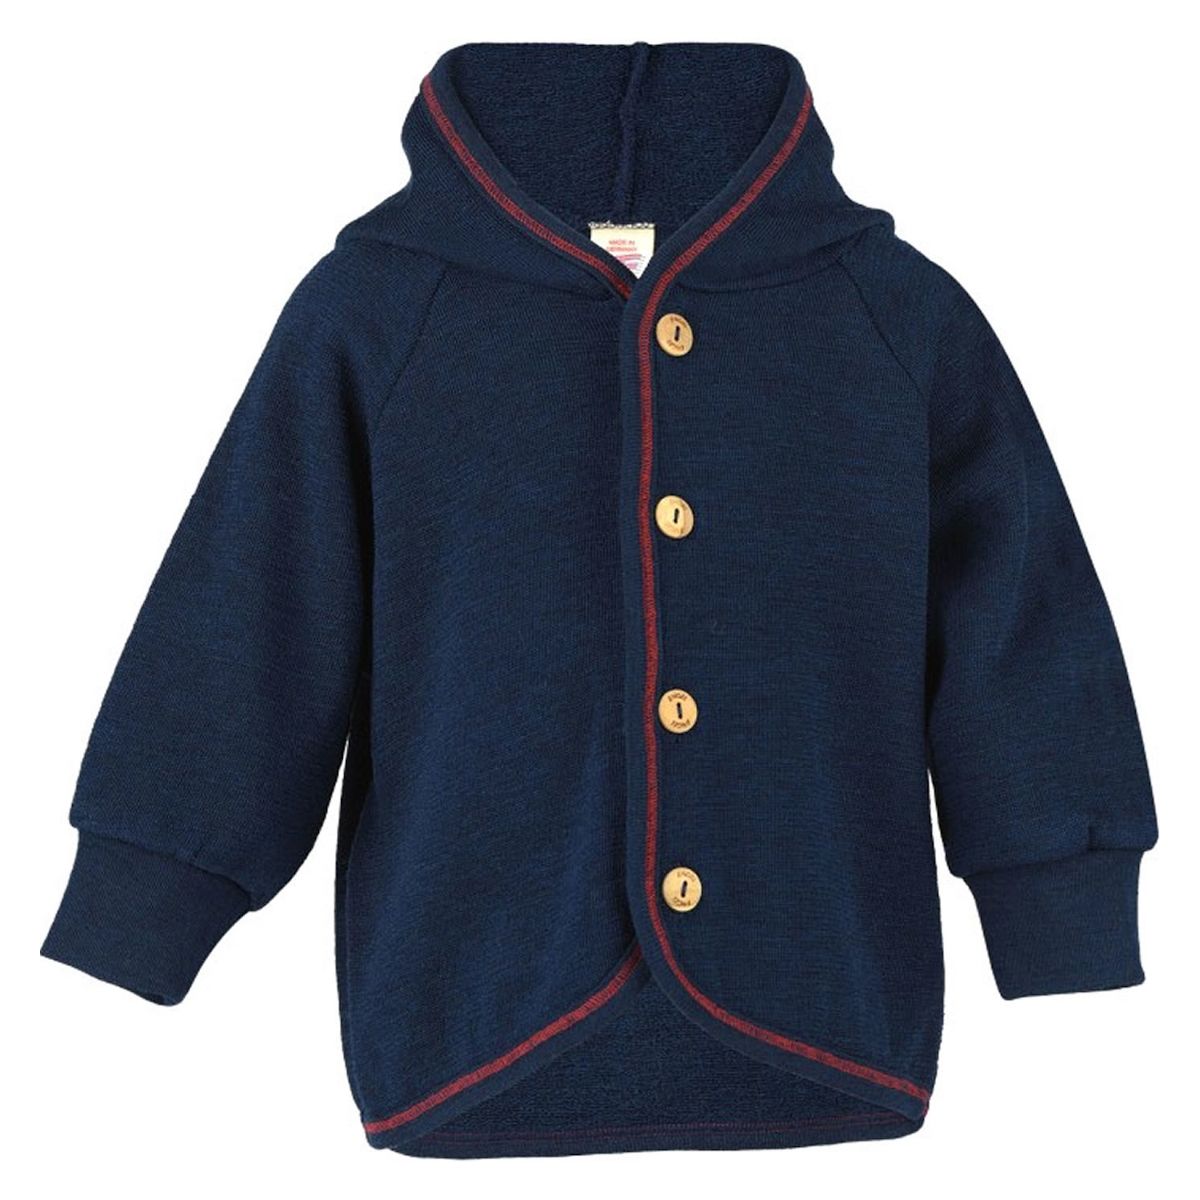 ENGEL Natur Hooded baby jacket with wooden buttons Navy blue 555520-33 